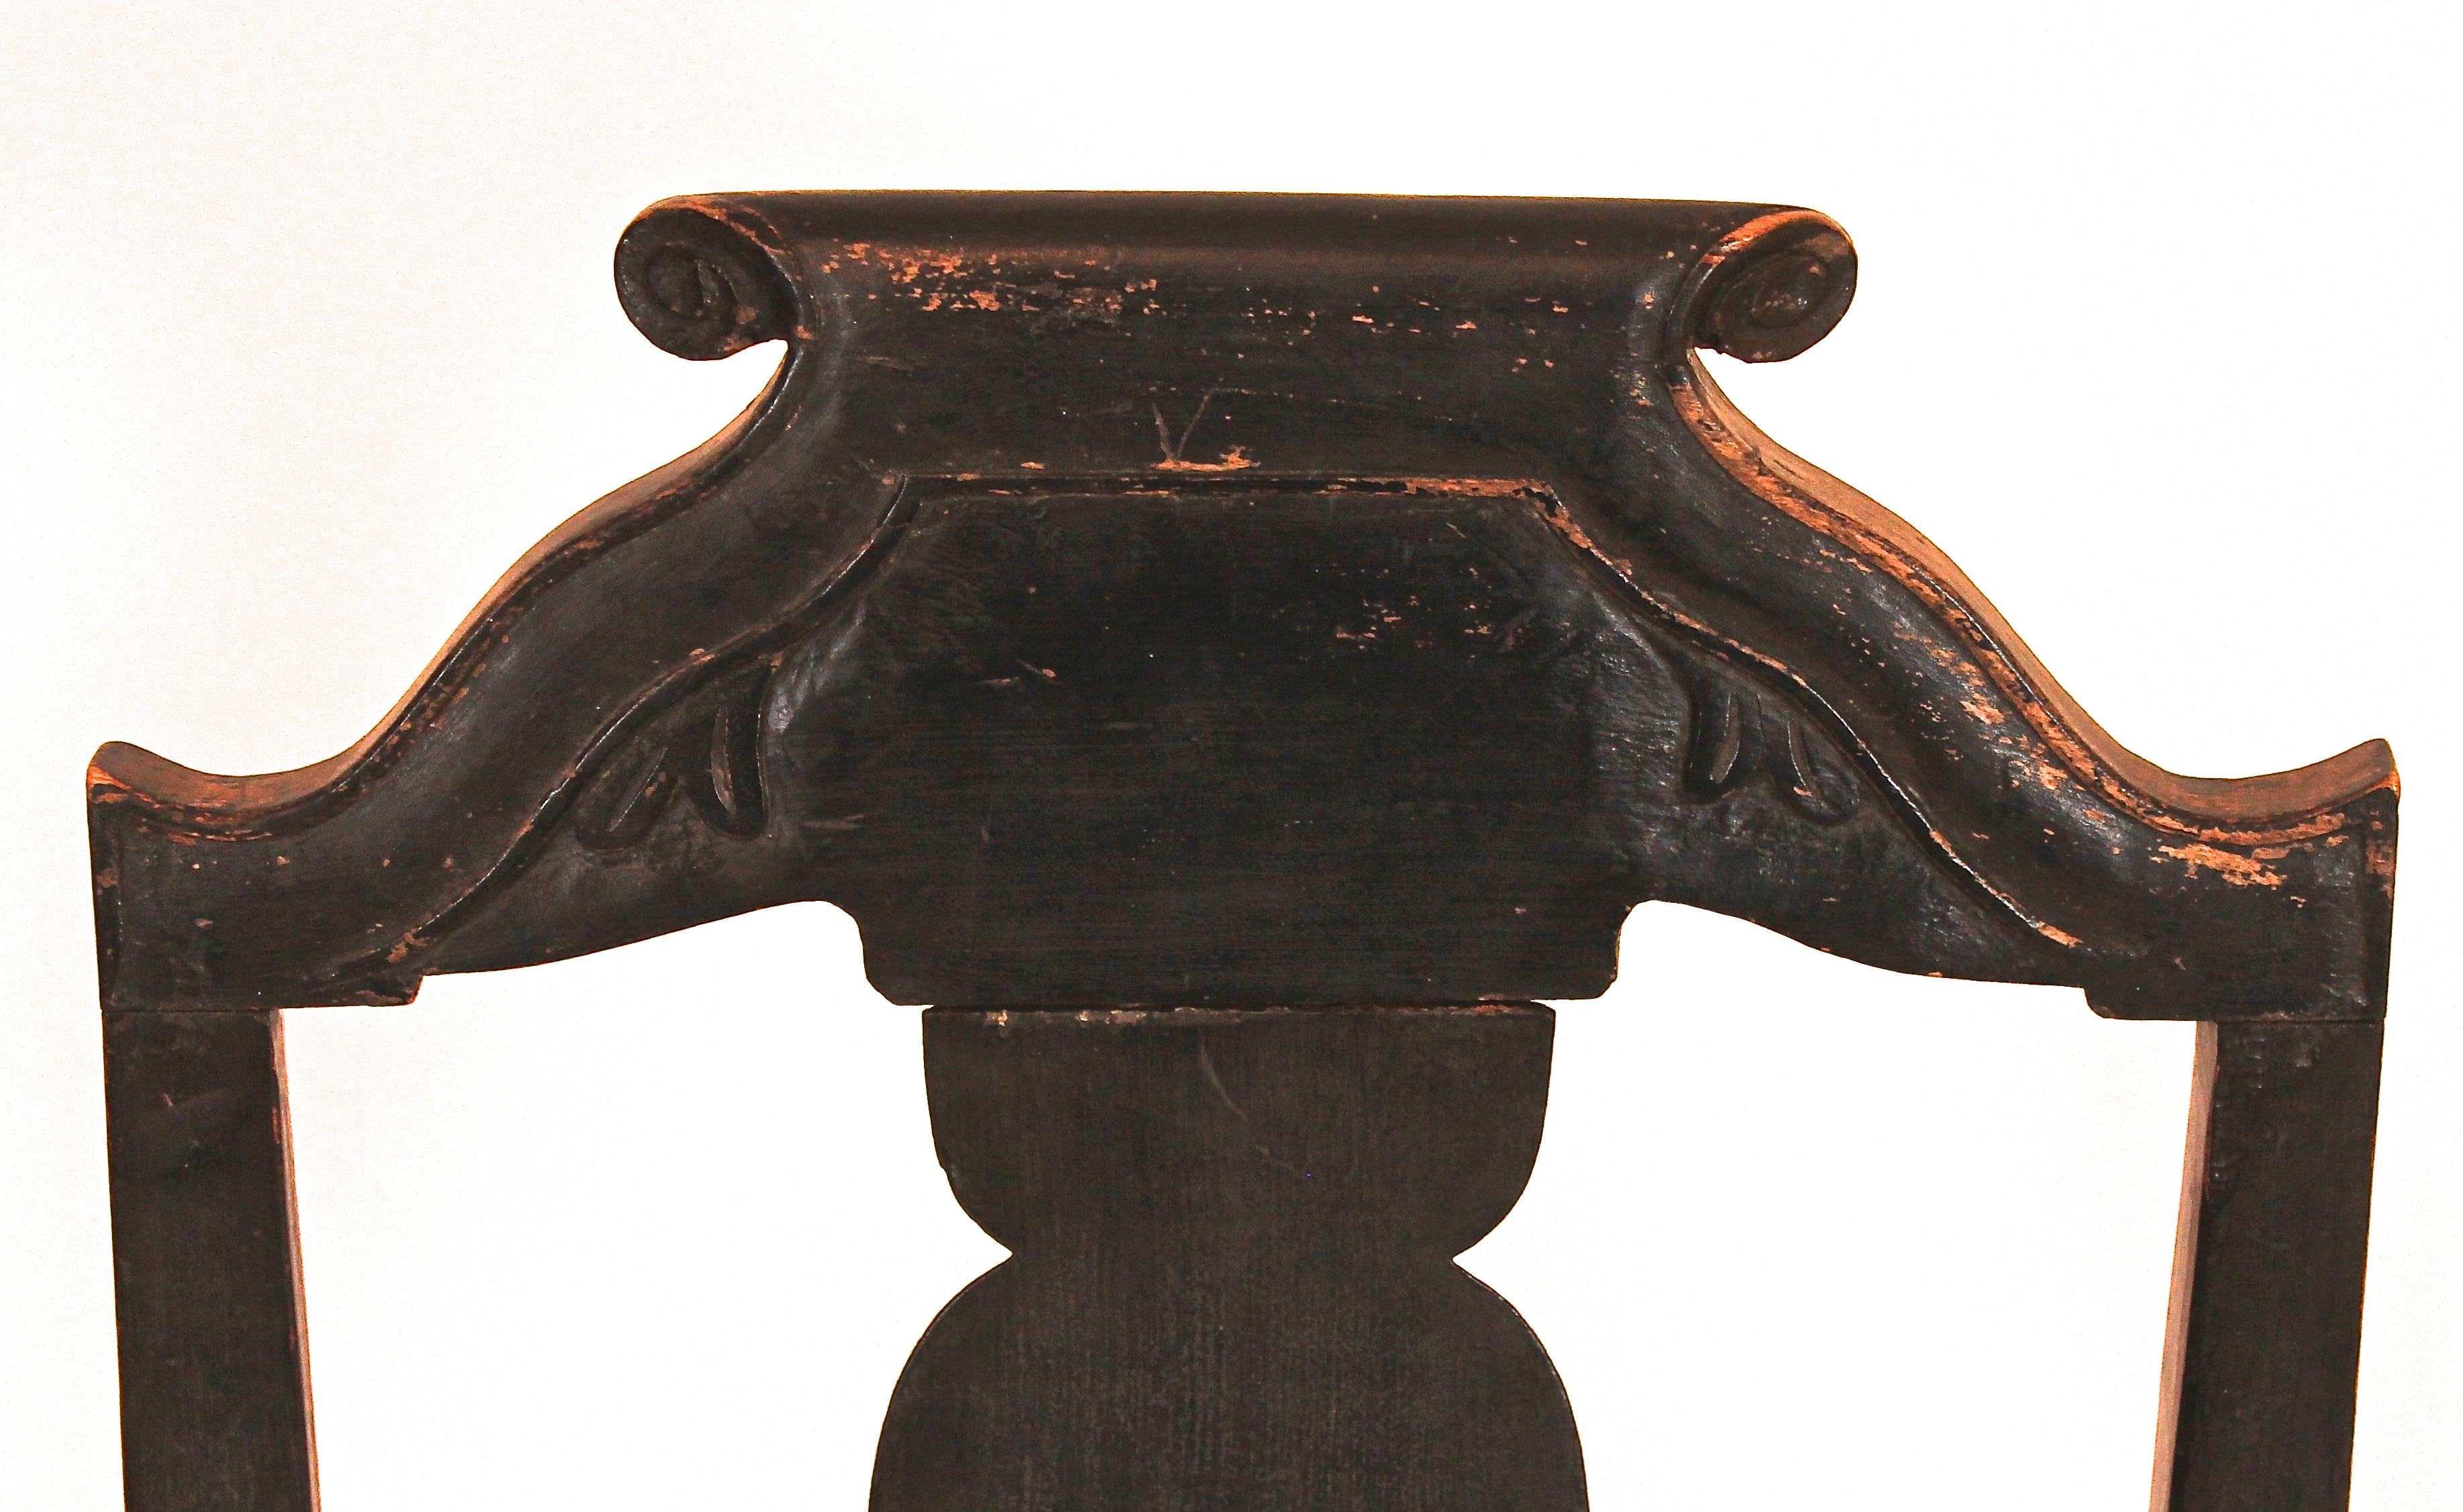 Stepped crest with carved volutes, solid splat, rush seat, turned legs, stretchers and ball feet. Ball and ring front stretcher. Early black paint over original green.